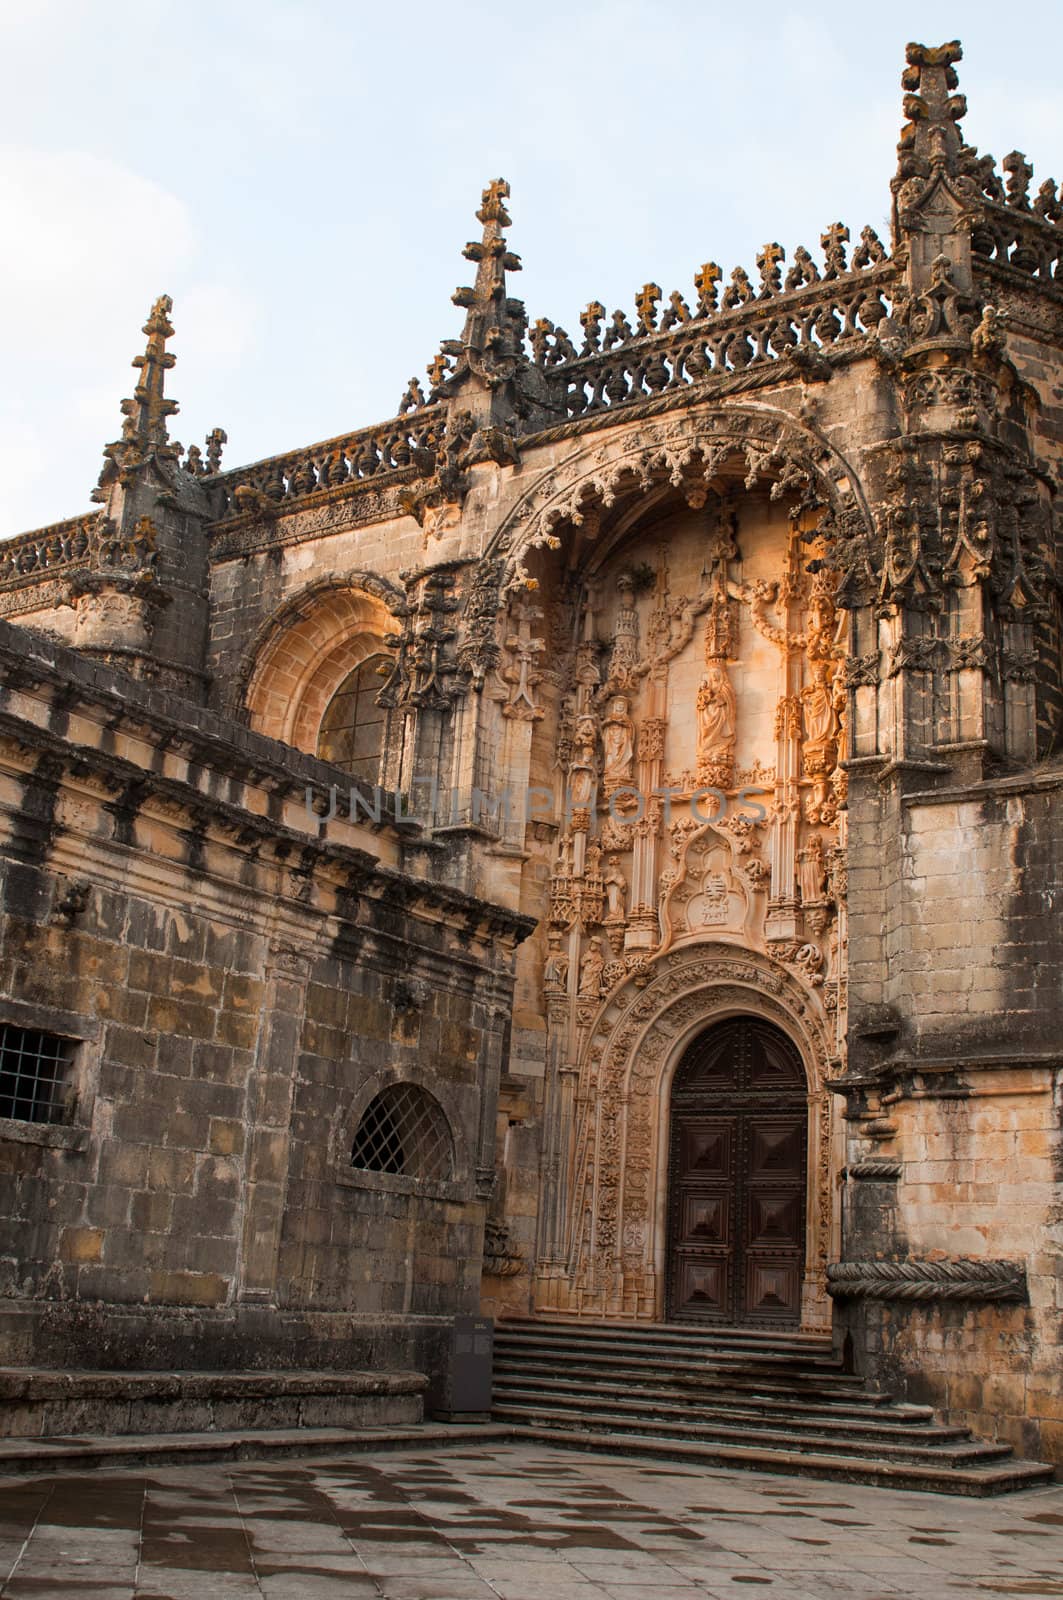 Templar Church entrance at the Convent of Christ in Tomar, Portugal (build in the 12th century, UNESCO World Heritage)